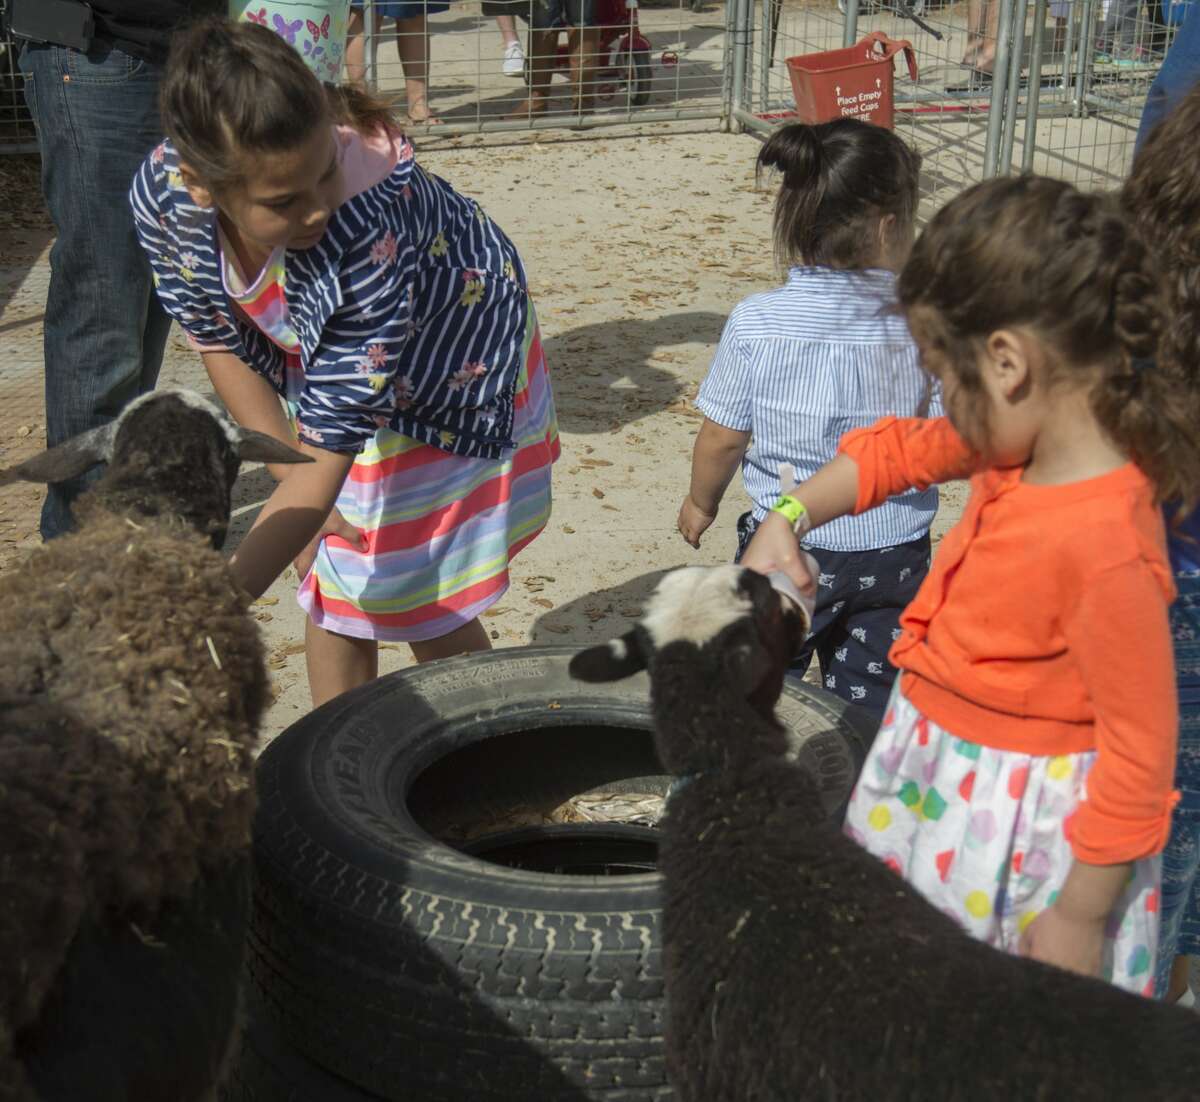 Children feed and pet farm animals 04-01-17 in the Whitley Acres Farms area at the Midland YMCA Egg-Stravaganza. Tim Fischer/Reporter-Telegram